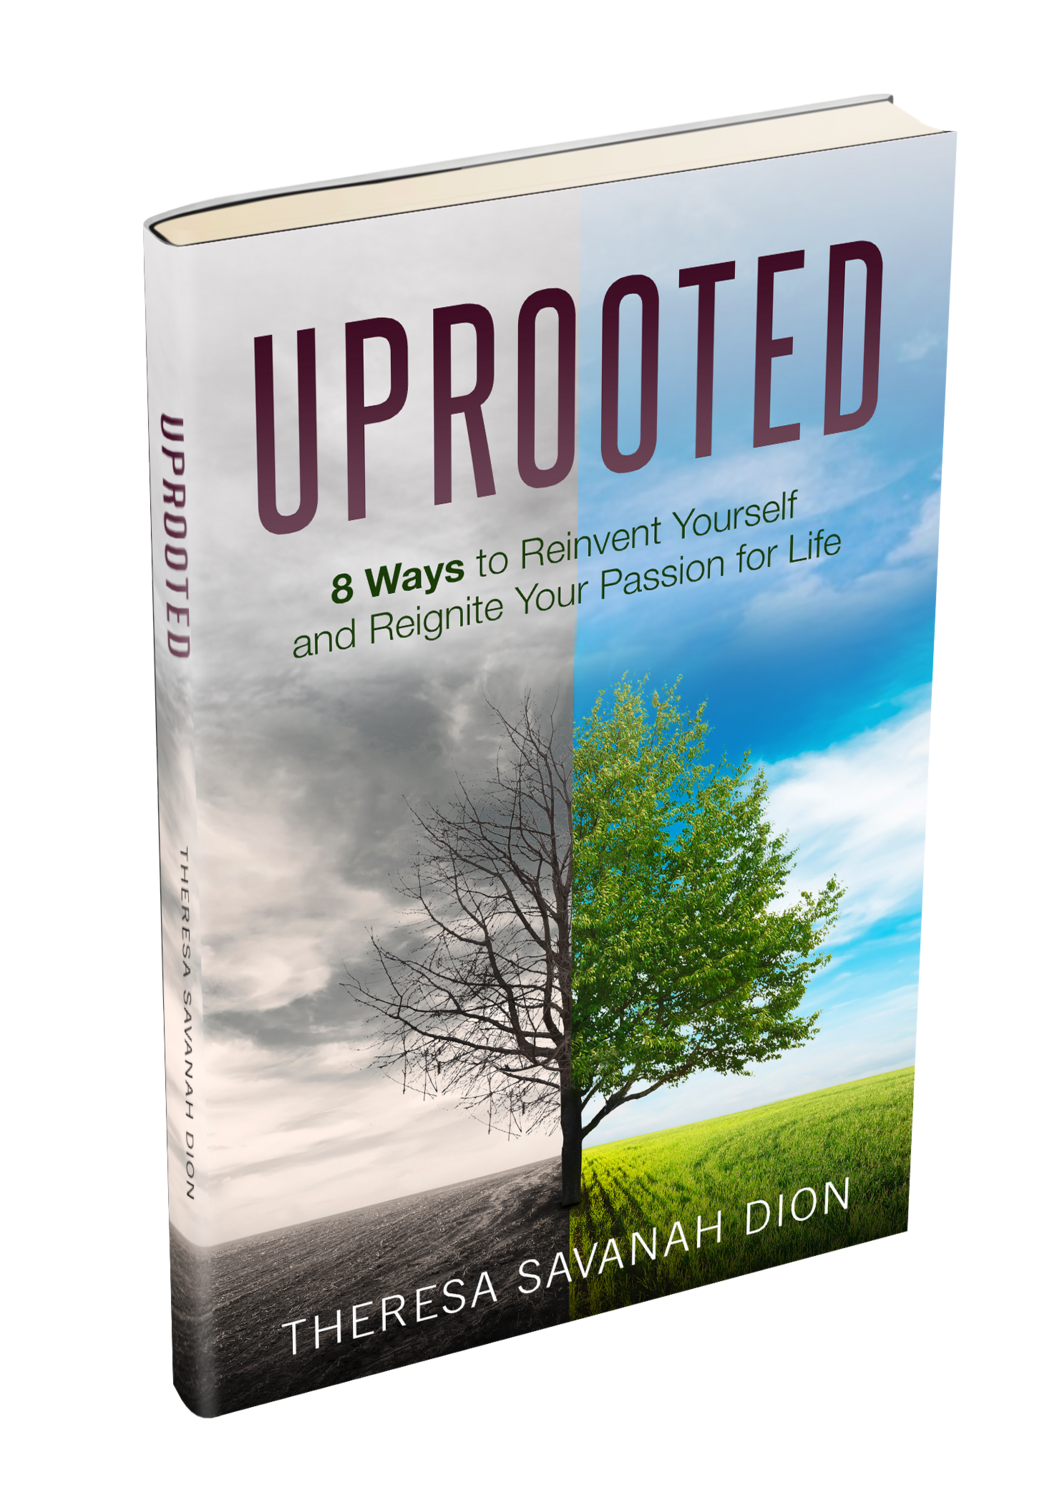 UPROOTED- 8 Ways to Reinvent Yourself and Reignite Your Passion for Life-
Is also available at:
https://books2read.com/u/bPD9BR